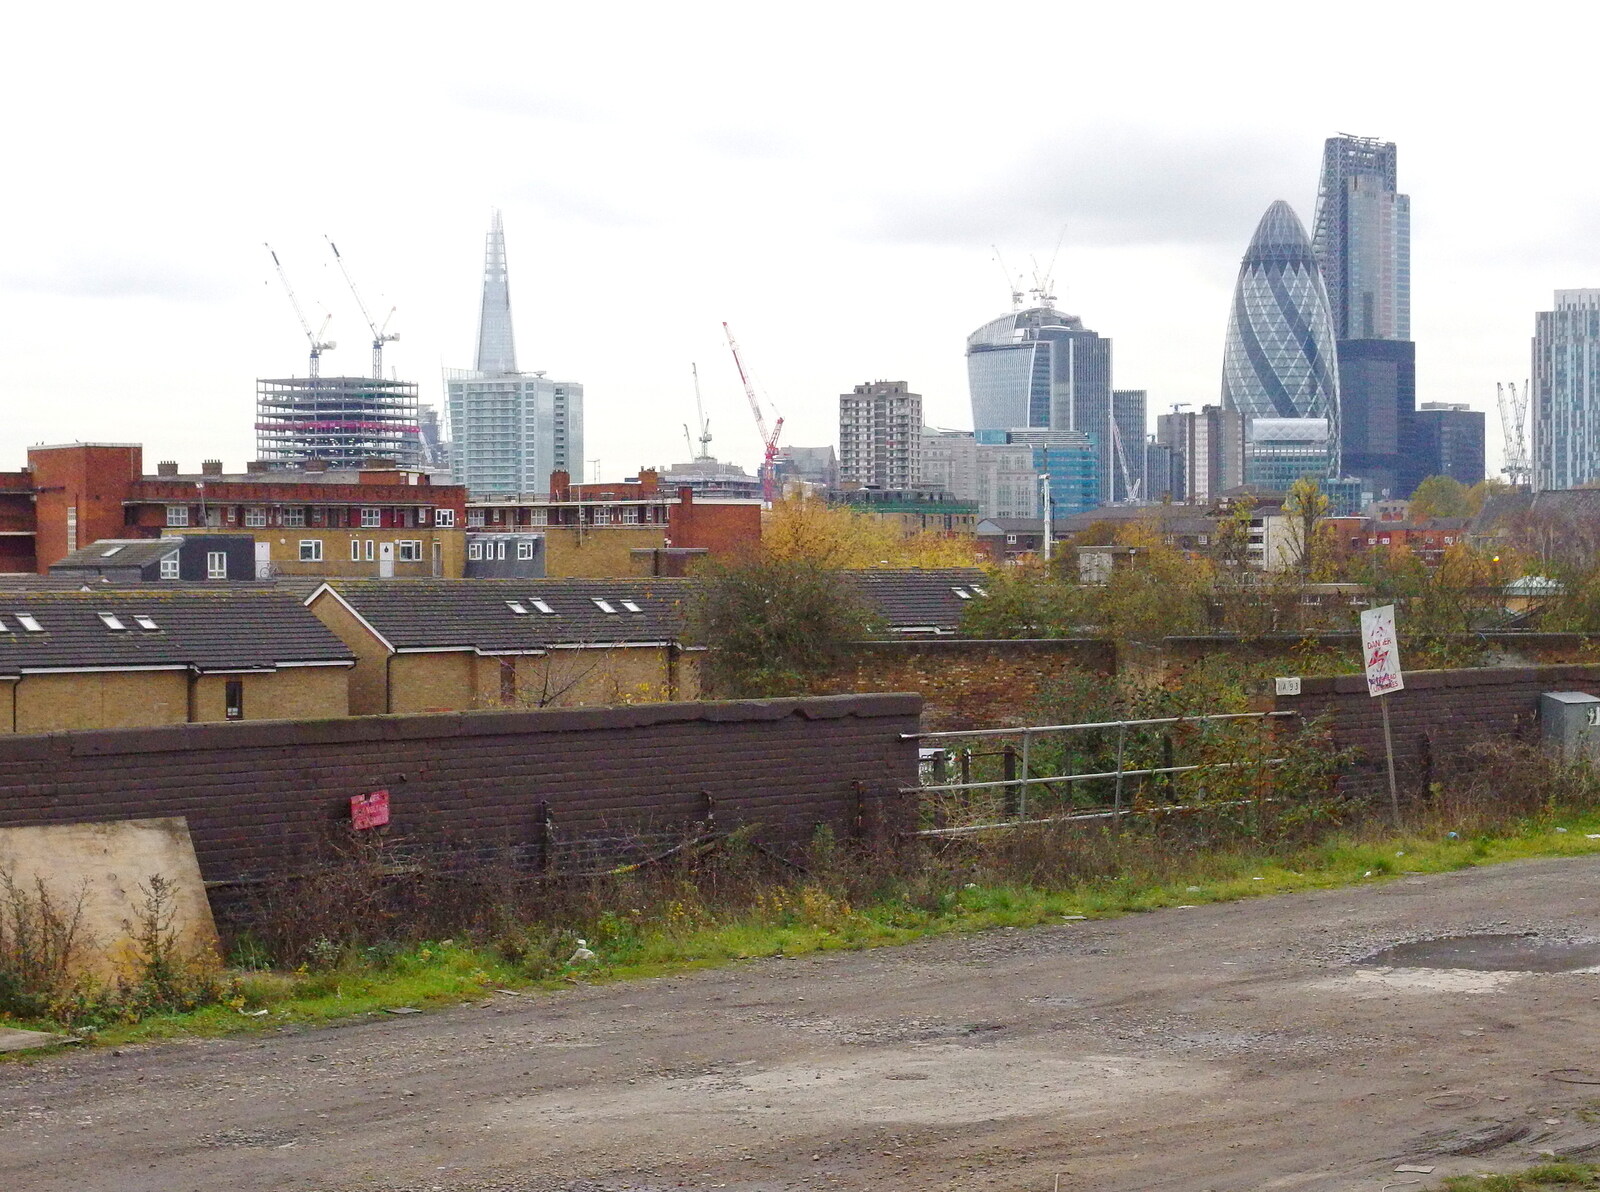 The ever-growing City of London skyline from Lunch in the East End, Spitalfields and Brick Lane, London - 1st December 2013